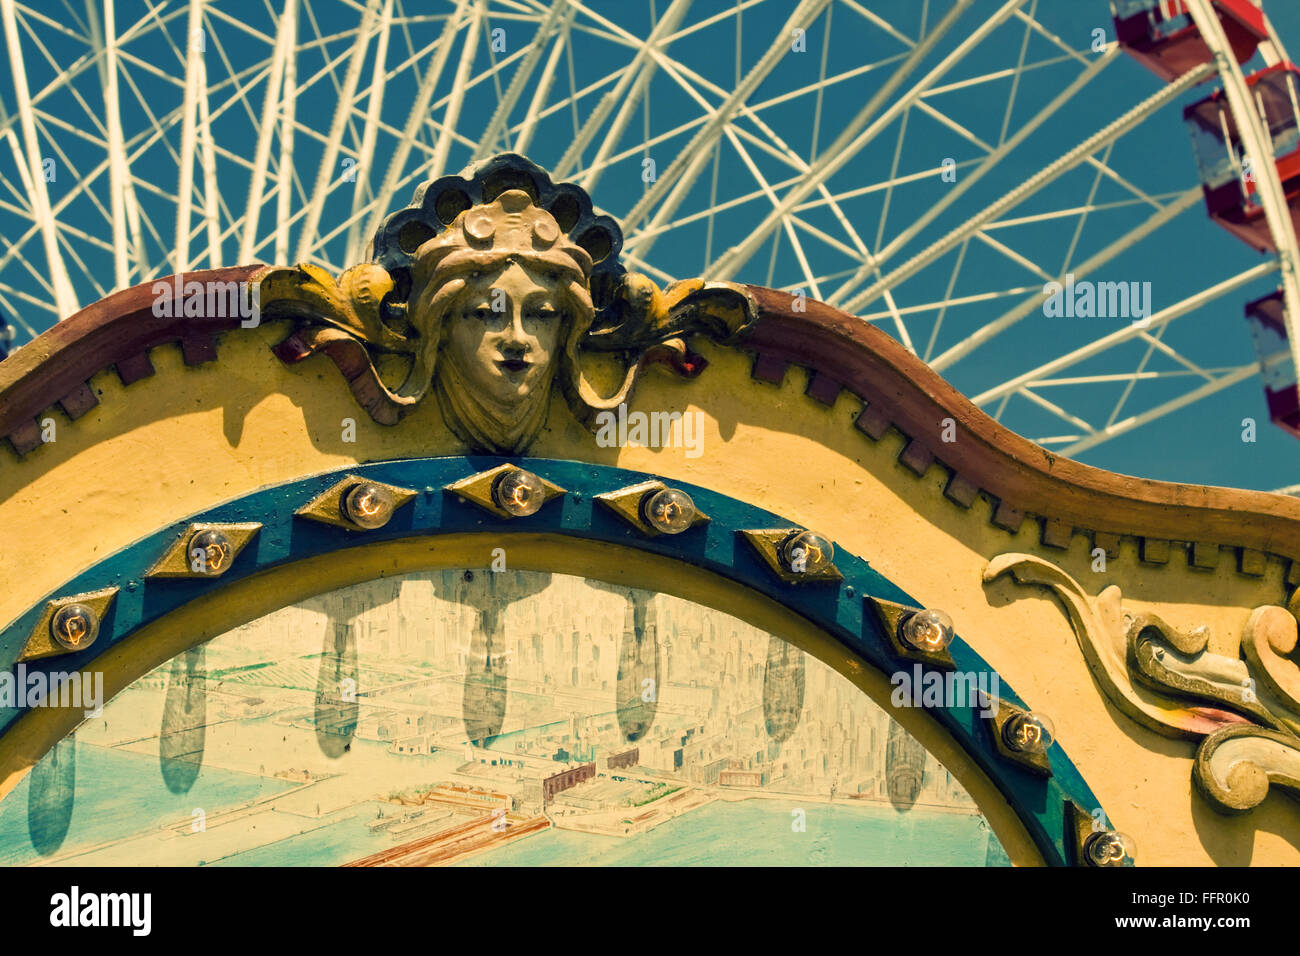 Carving of female head on old carousel with ferris wheel in background Stock Photo